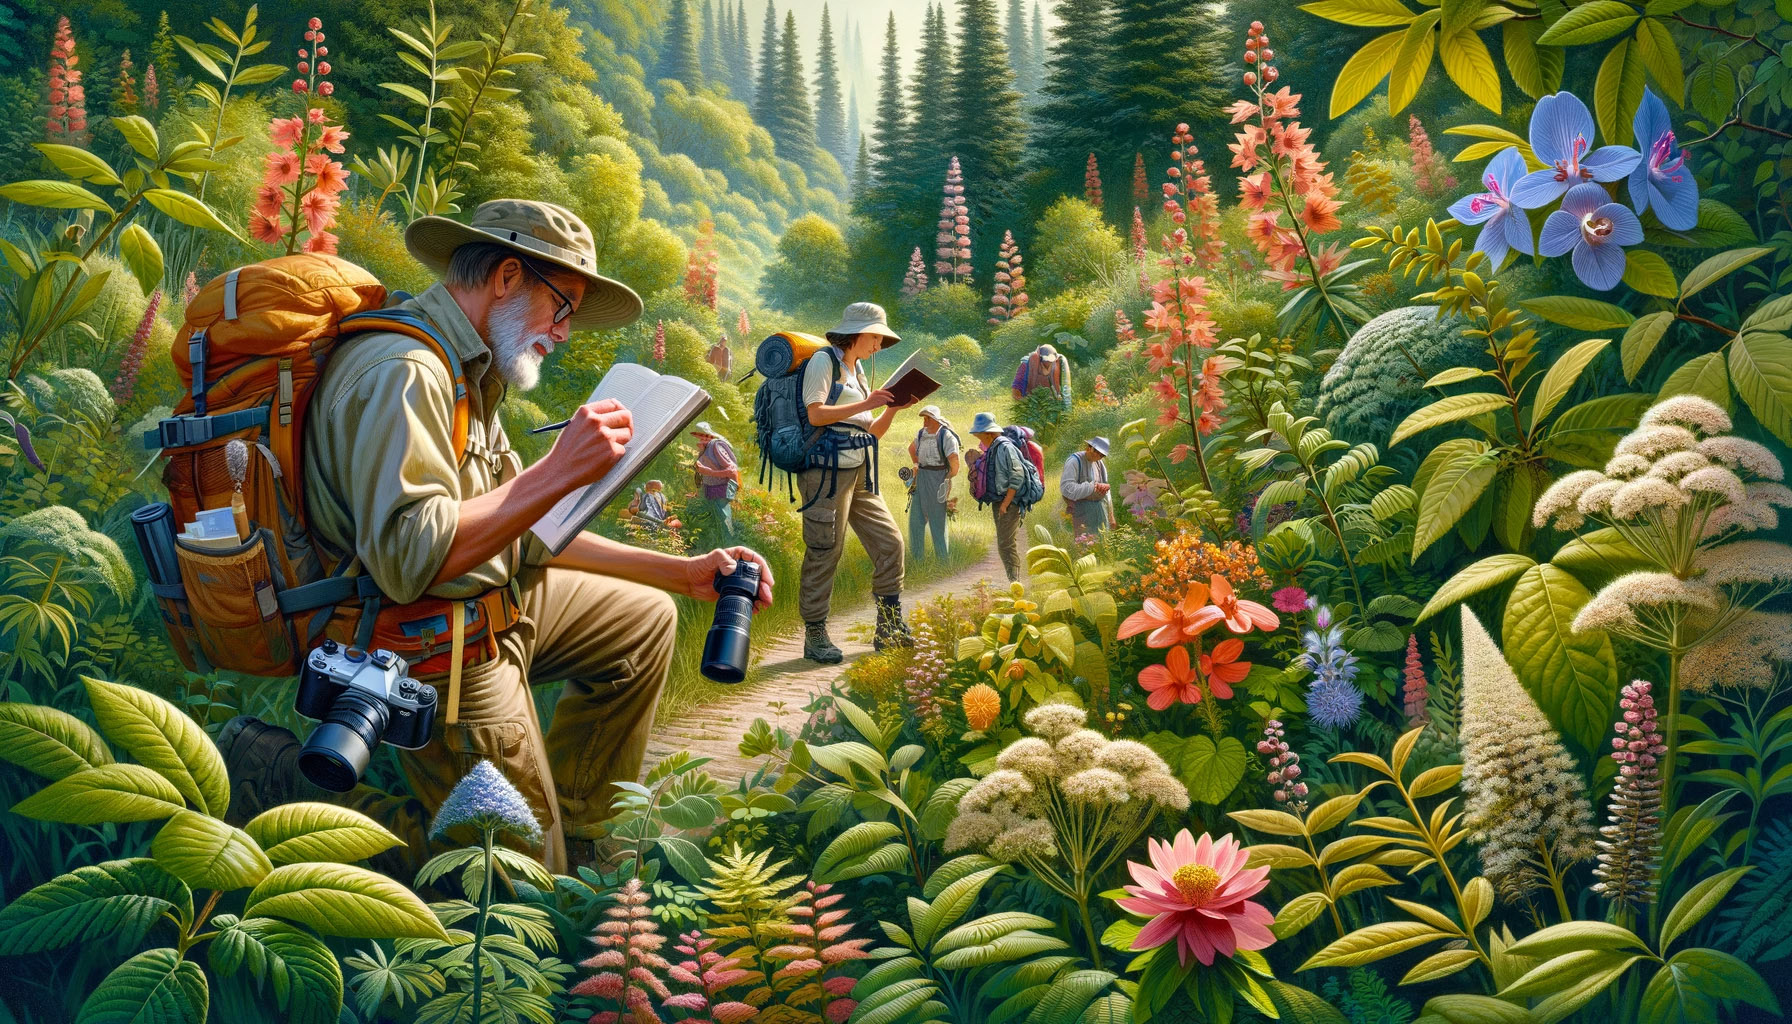 An image depicting hikers engaged in botanical exploration on a nature trail. The scene shows a diverse range of plants and flowers